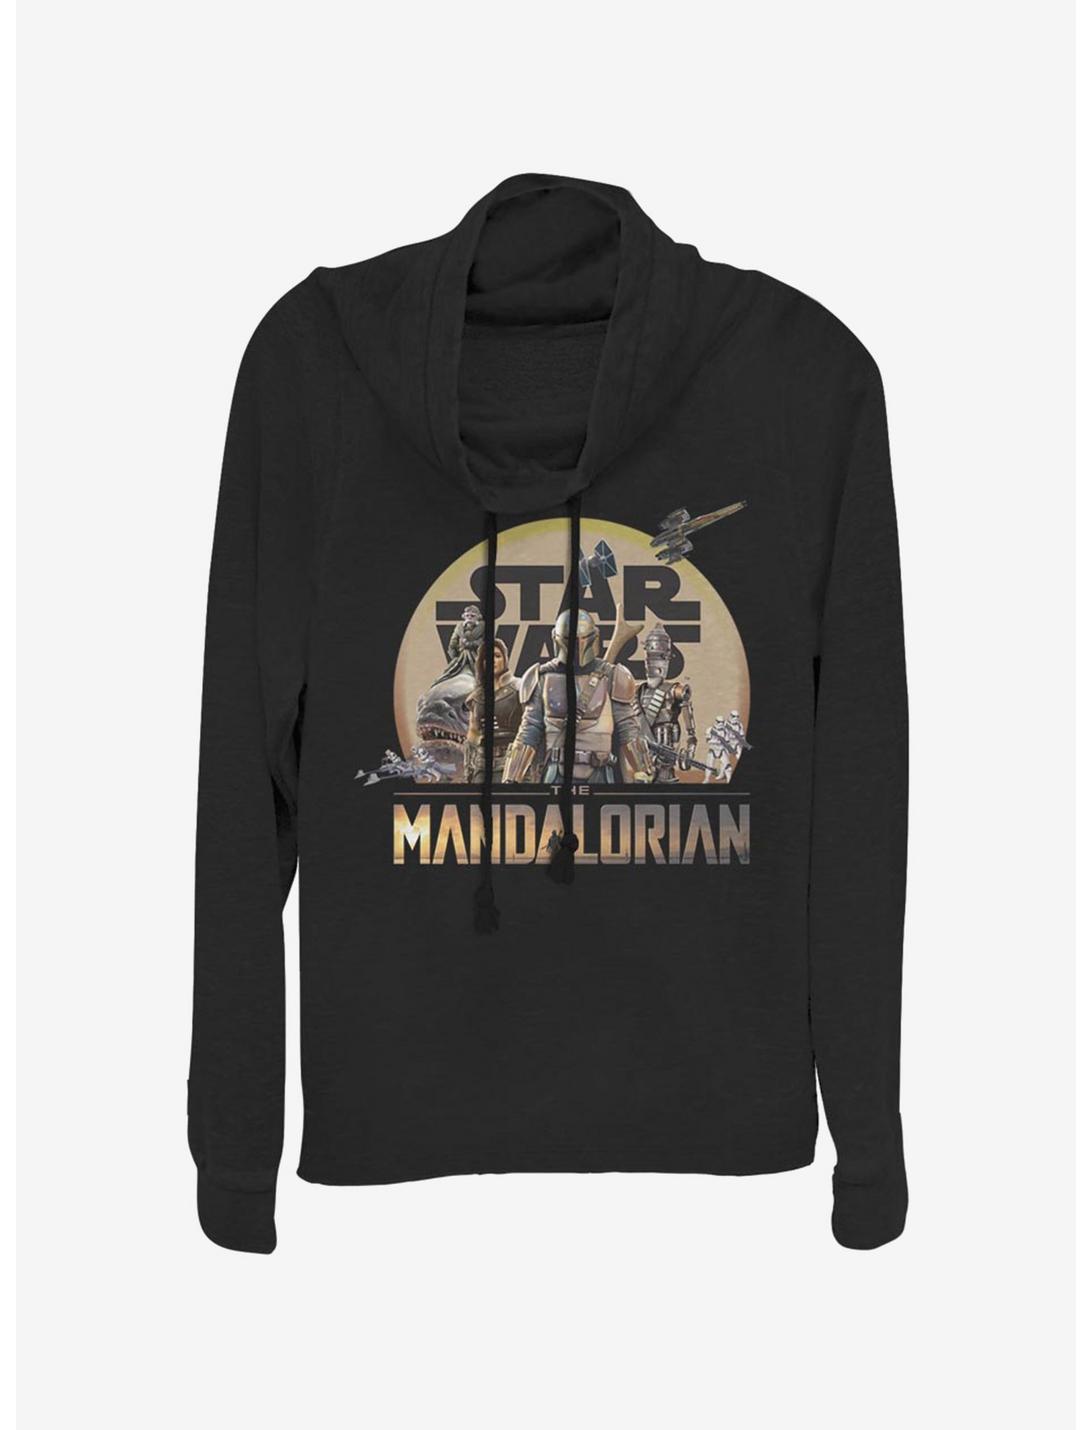 Star Wars The Mandalorian Charcter Action Pose Cowlneck Long-Sleeve Womens Top, BLACK, hi-res